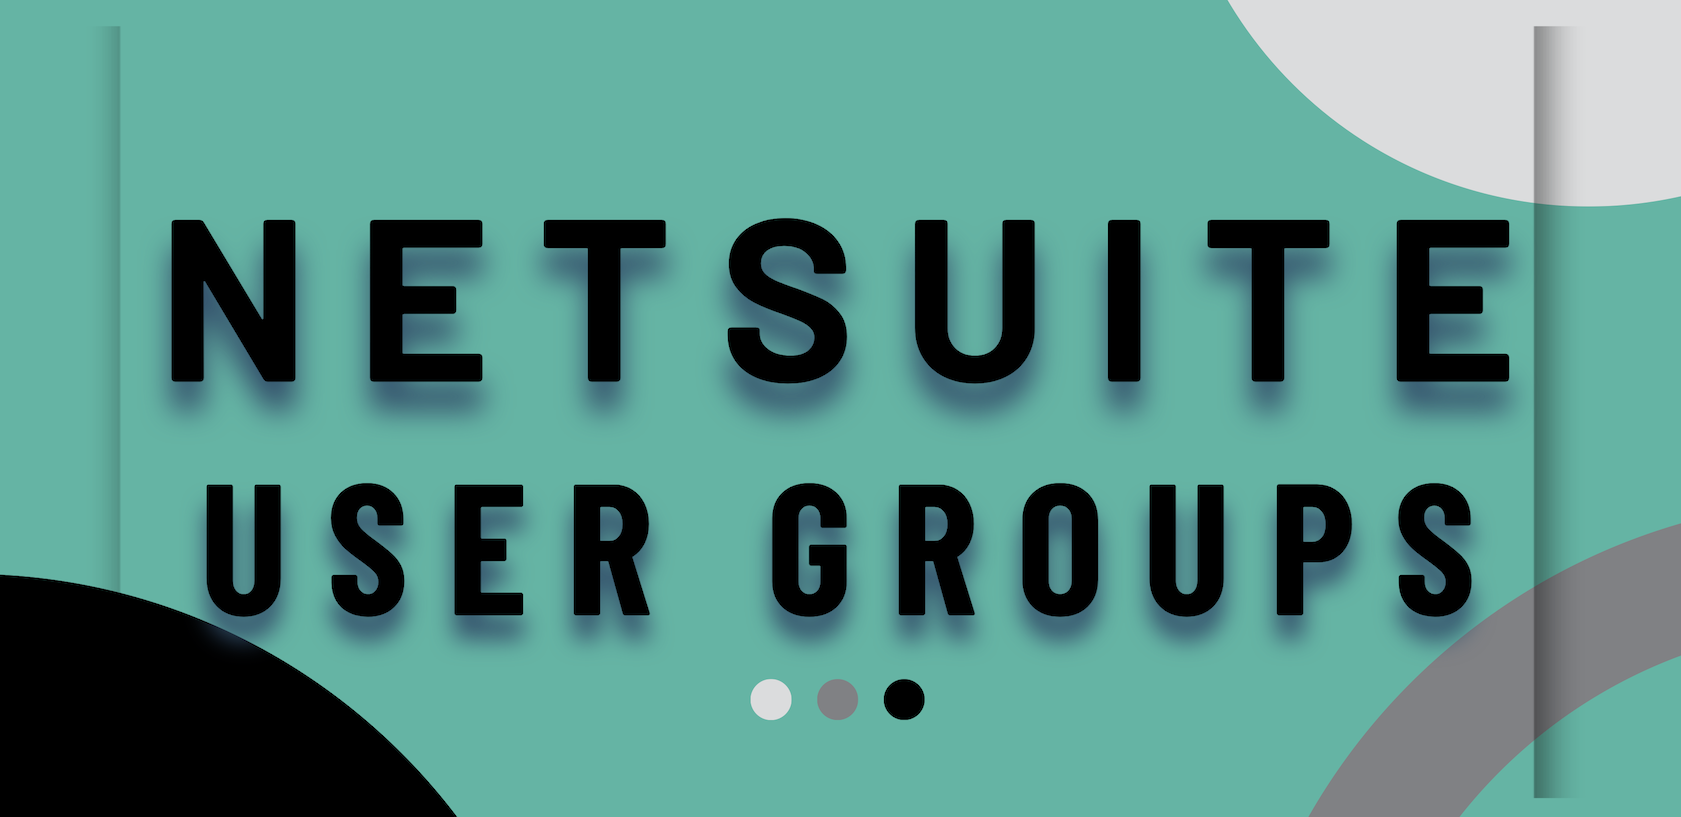 Oracle NetSuite User Groups - Collective Mind Technologies